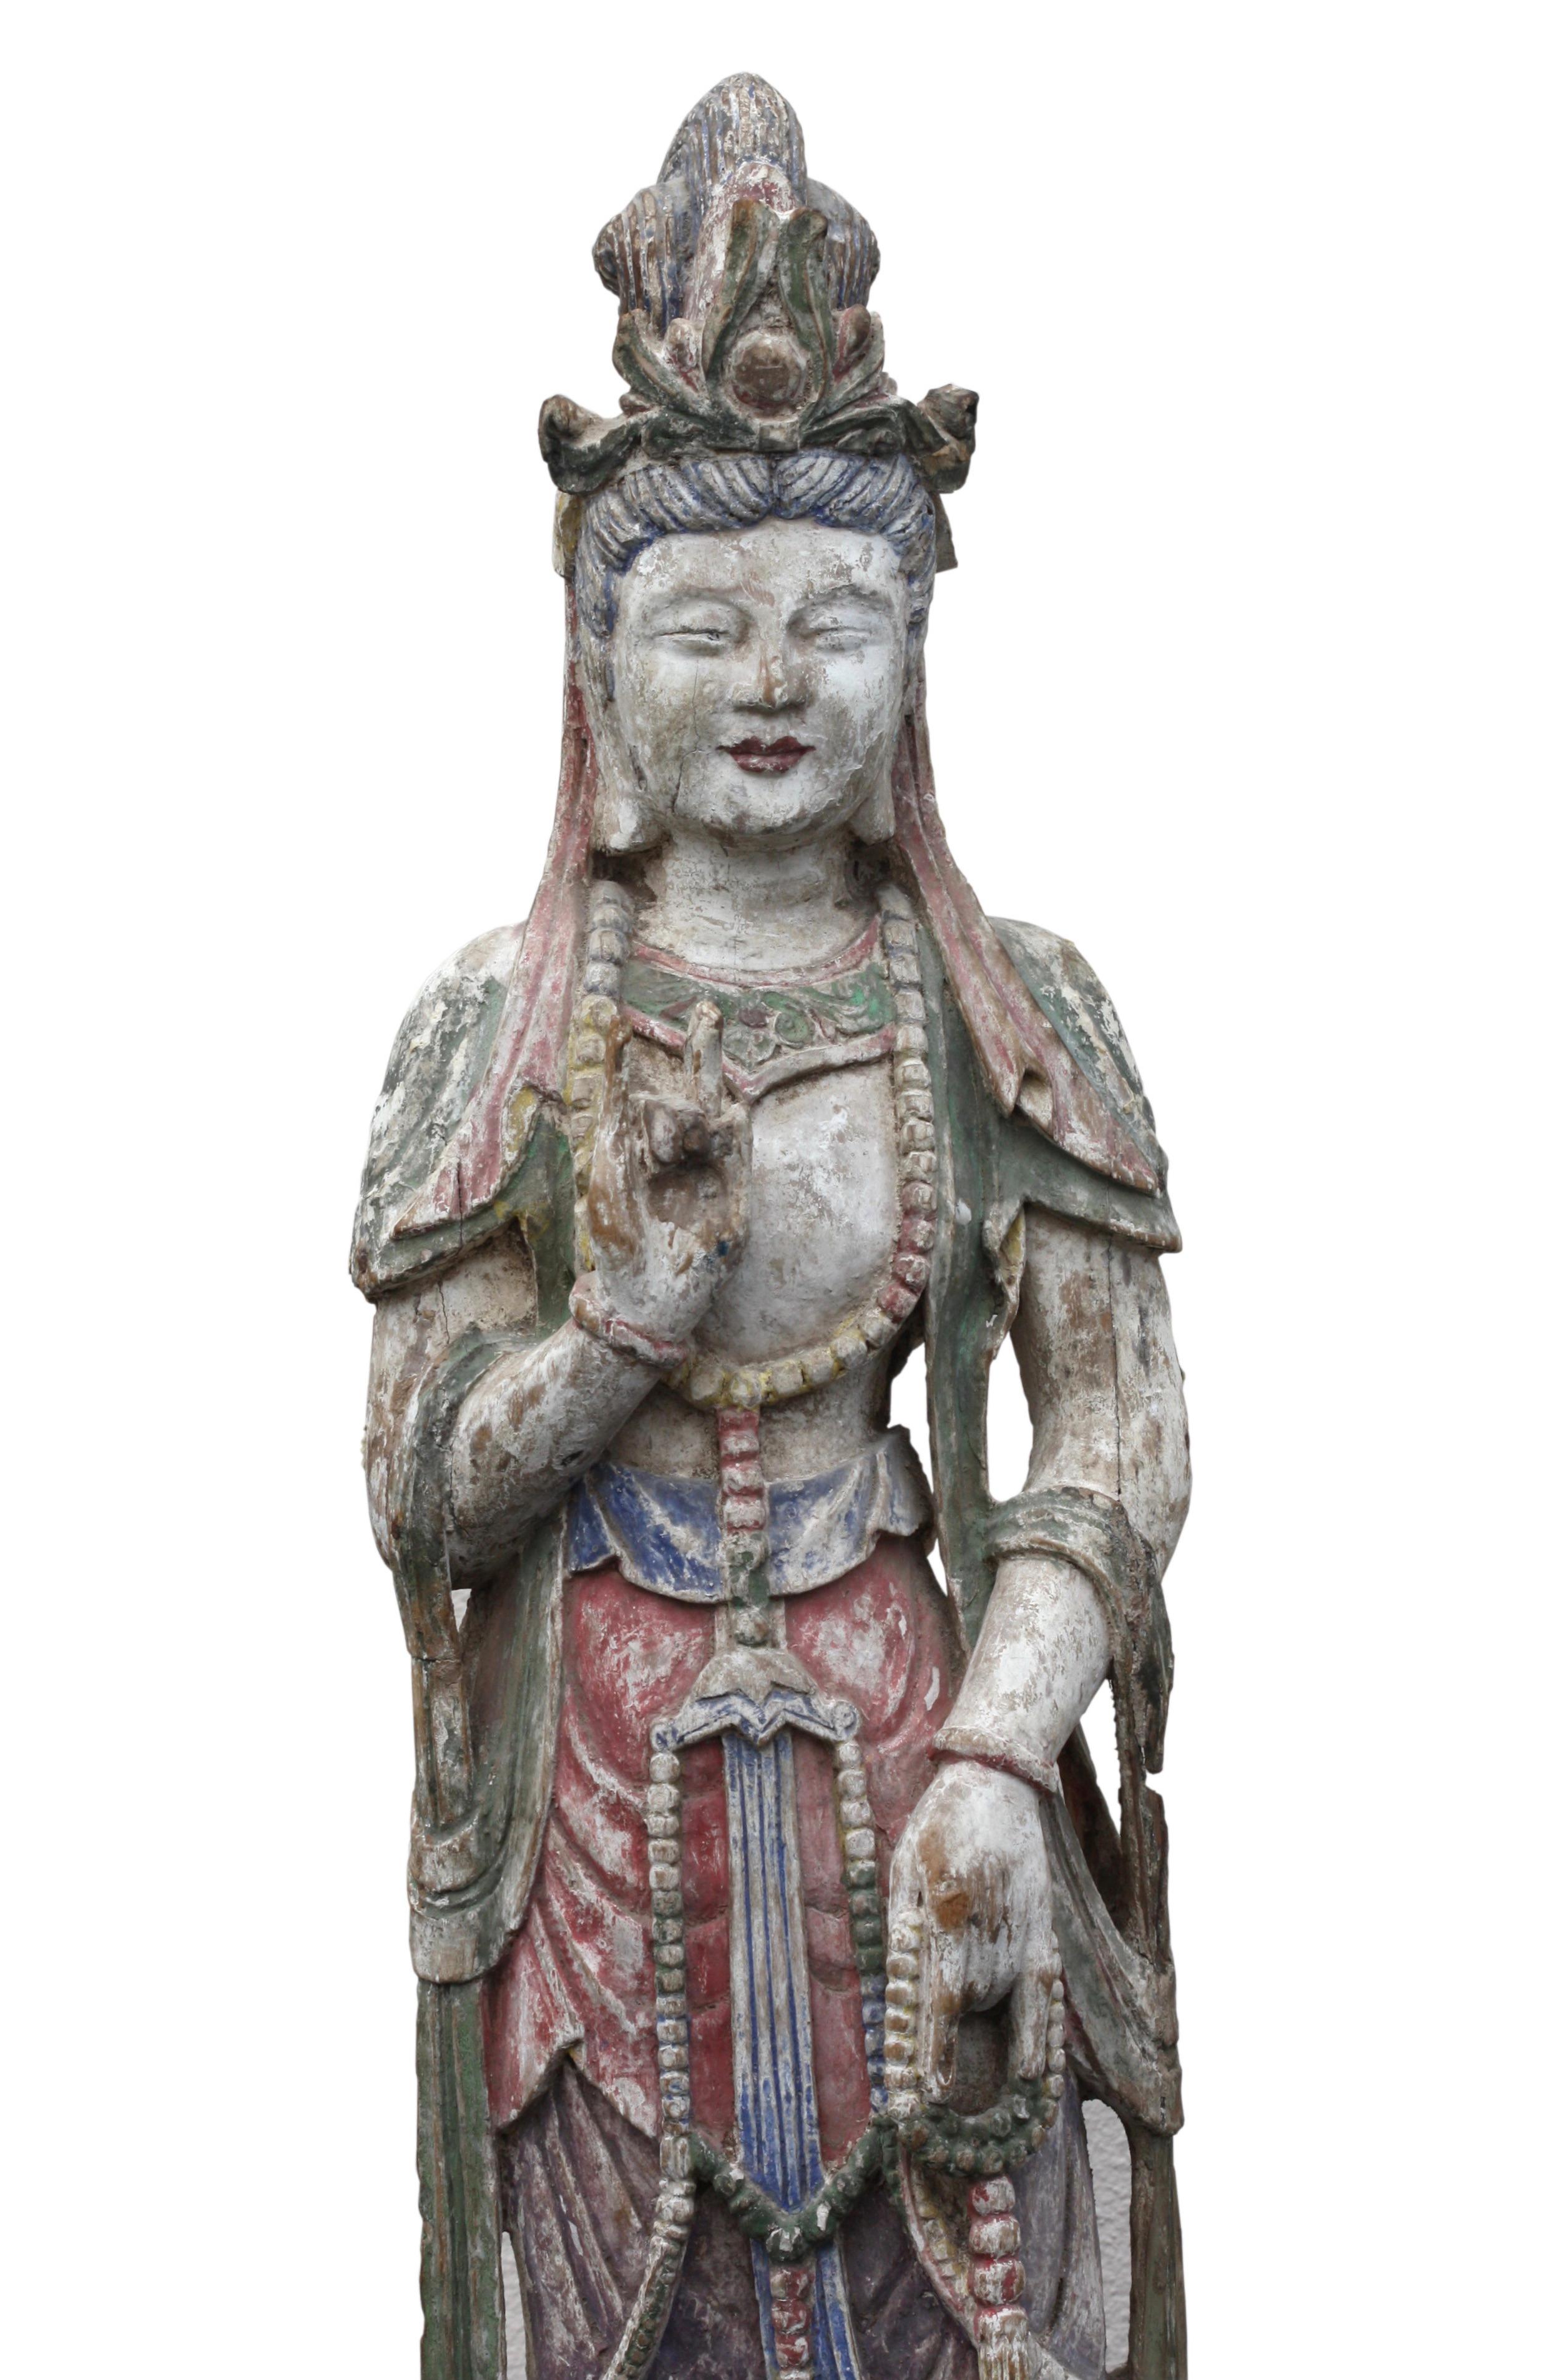 A Chinese polychrome-decorated carved wood figure of a Bodhisattva
Standing regally with her hands in vitarka mudra, a five-pointed diadem set on her head, the angular face with broad flat nose and prominent lips, the ears, chest and body adorned